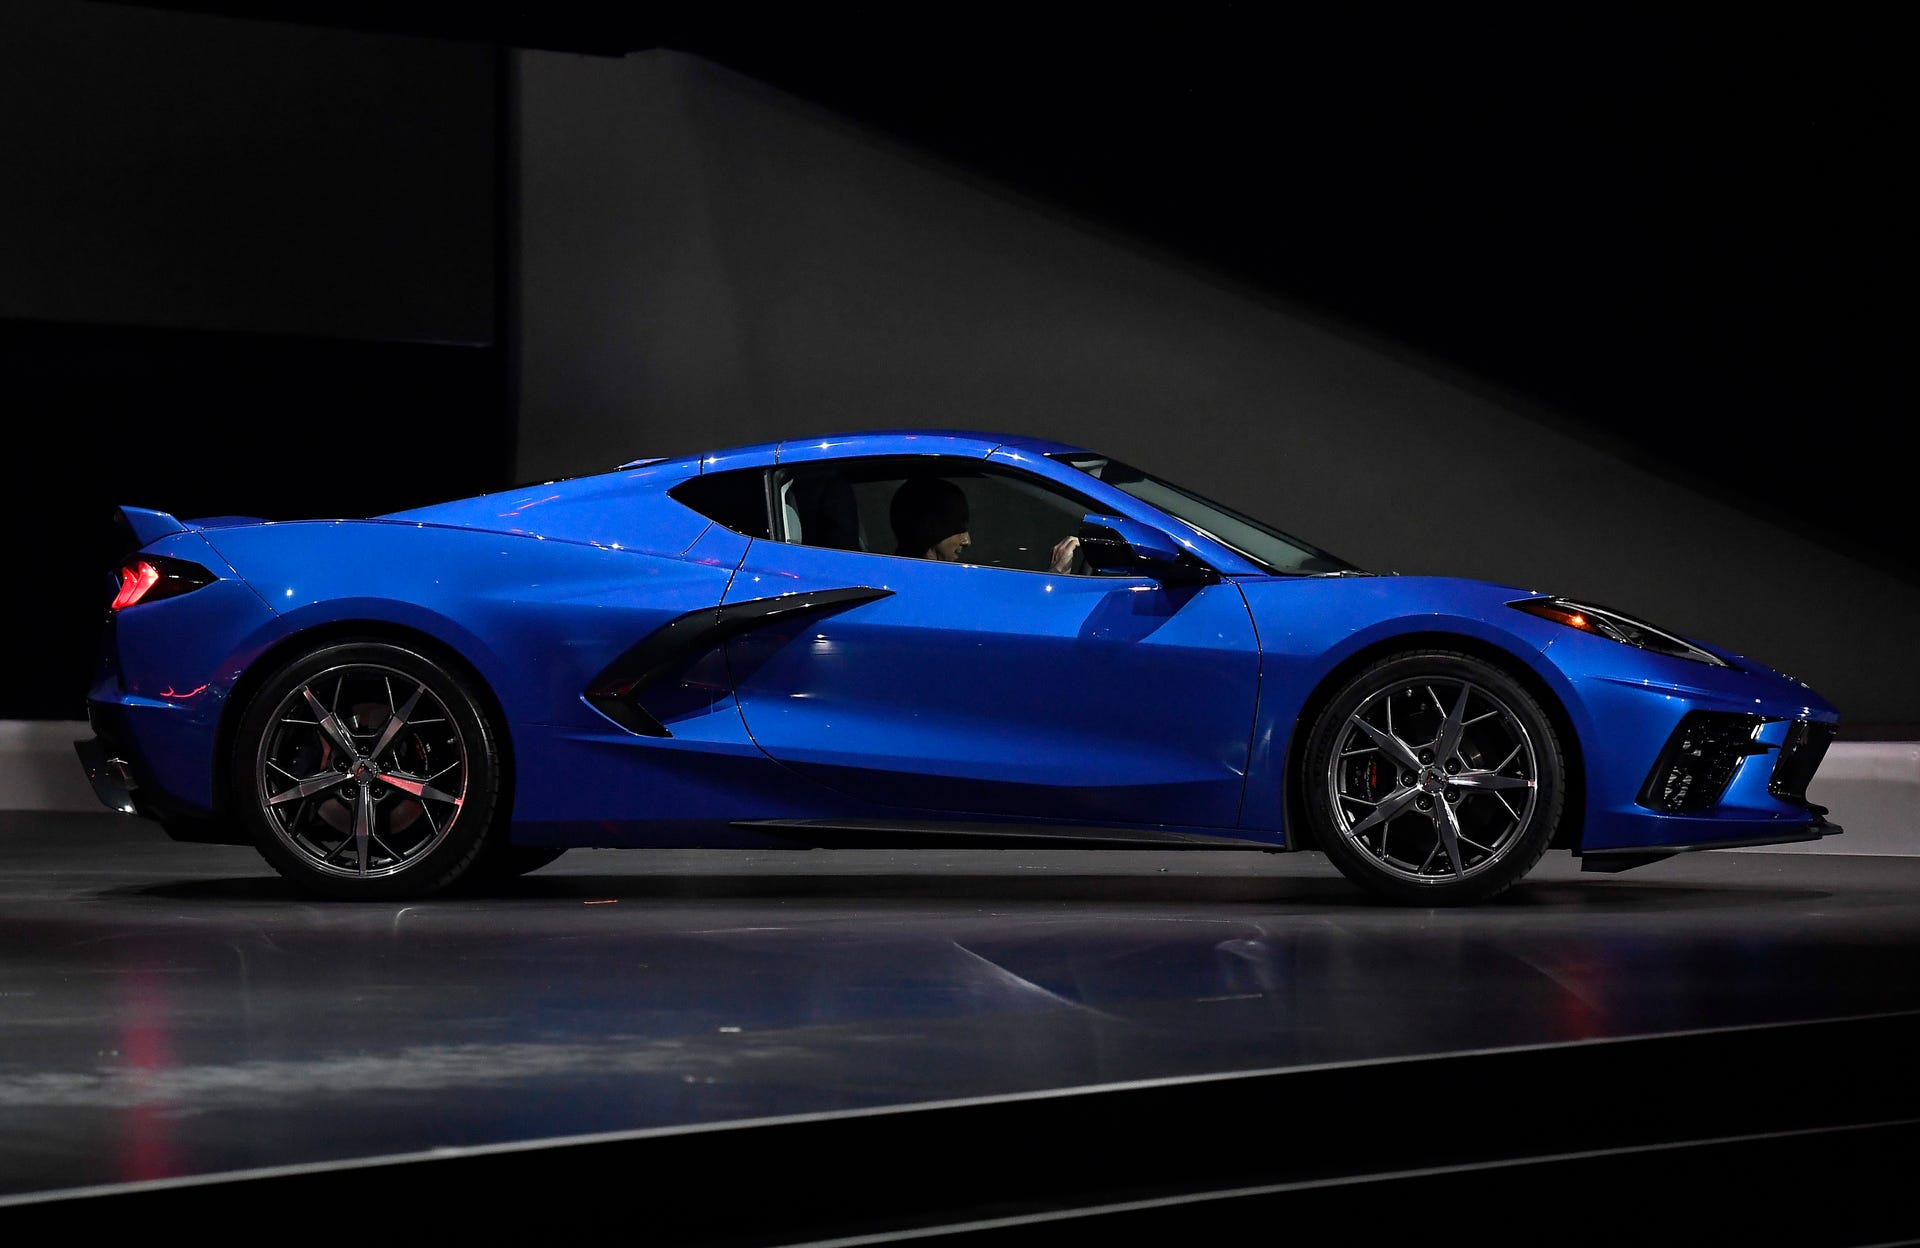 The 2020 mid-engine C8 Corvette Stingray by General Motors is unveiled during a news conference on July 18, 2019 in Tustin, California.